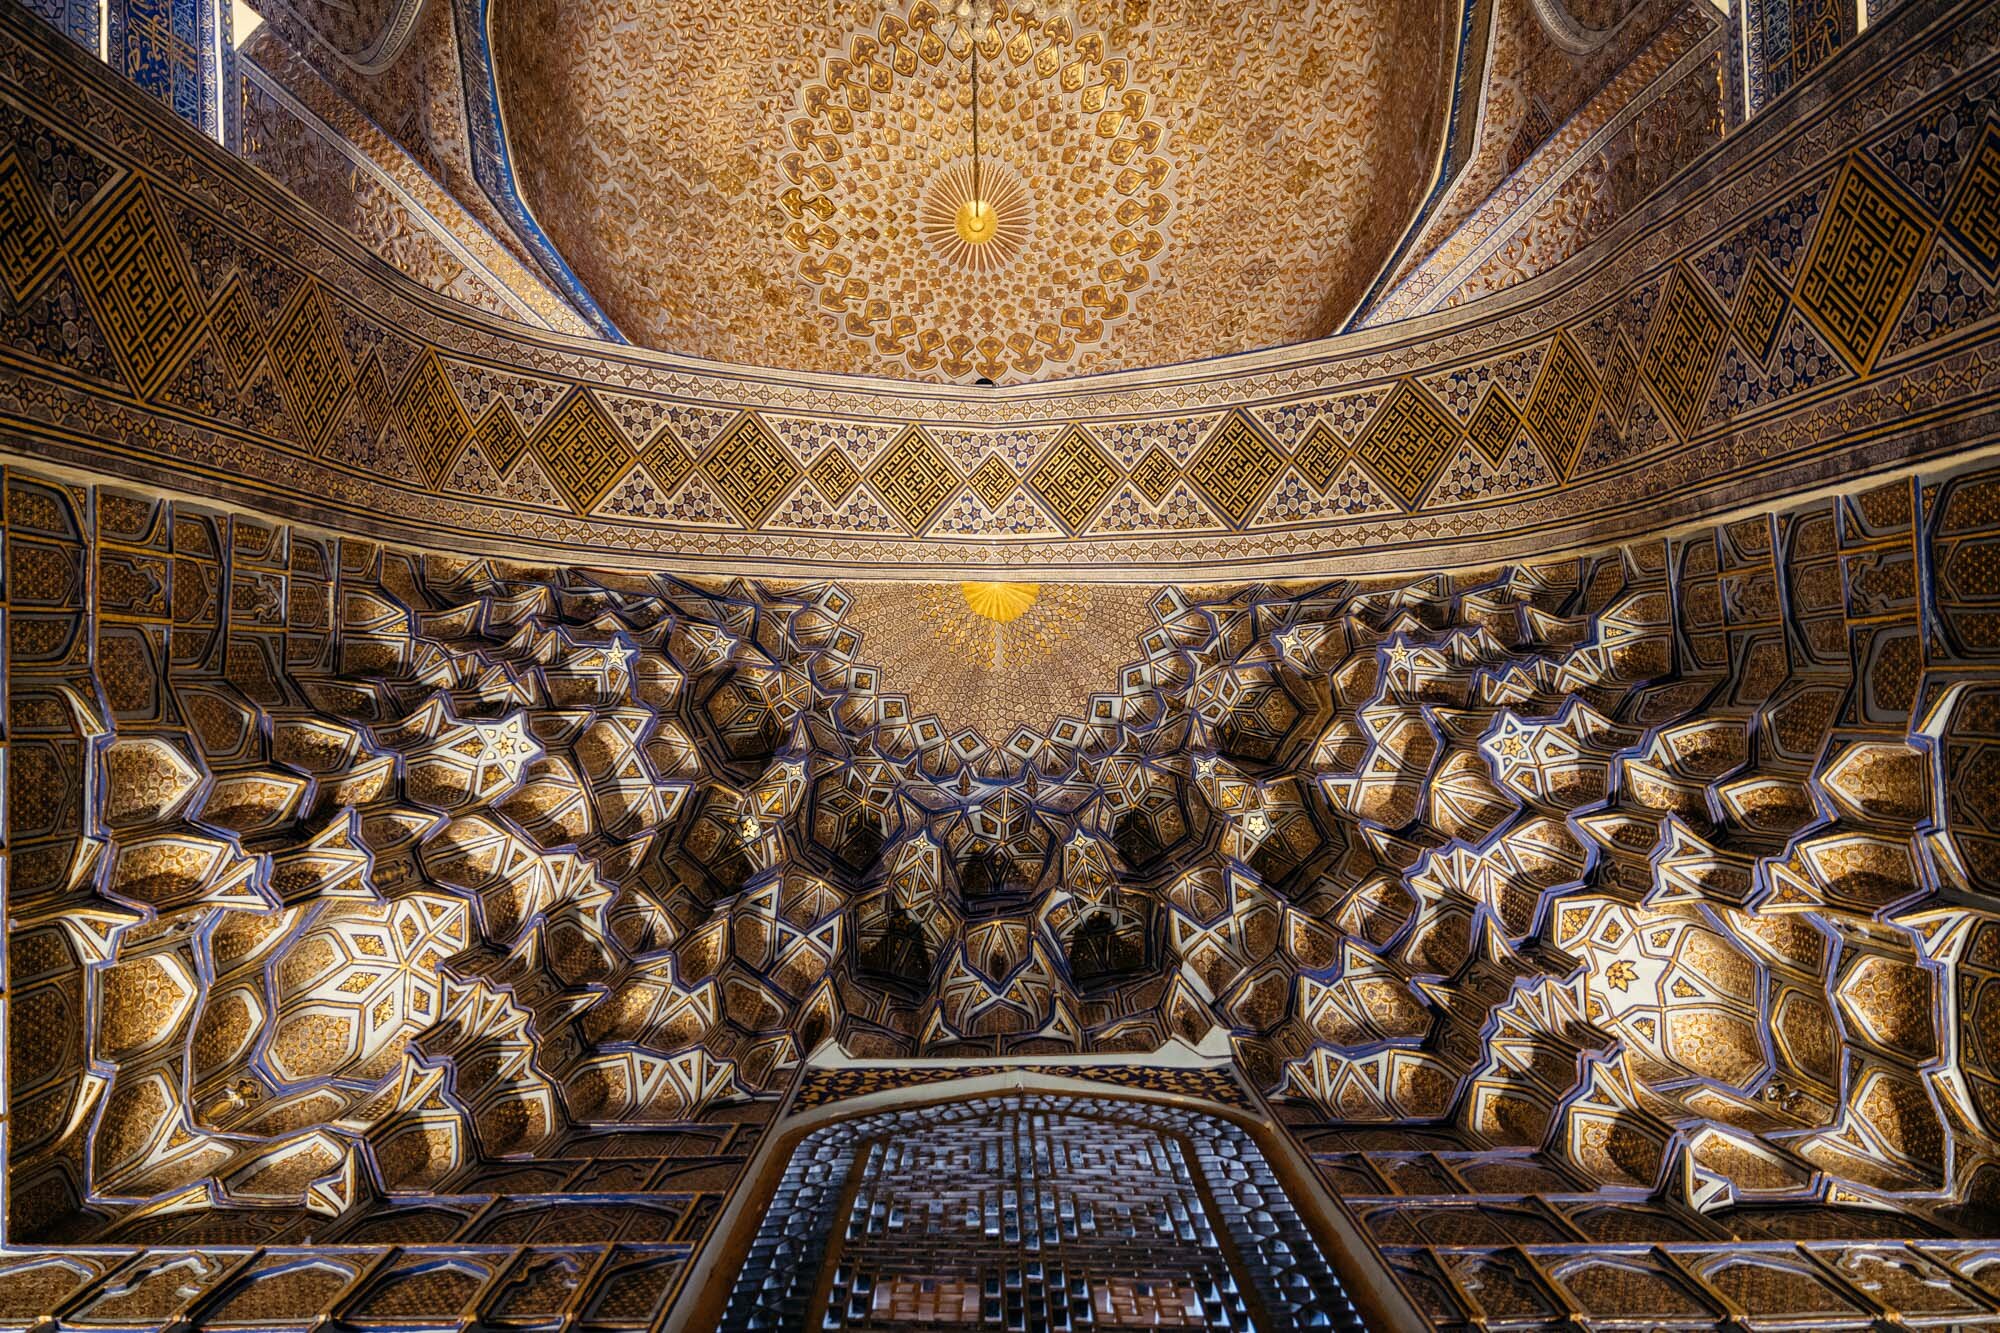  Ceiling details I (the mausoleum has been heavily restored in recent years) 